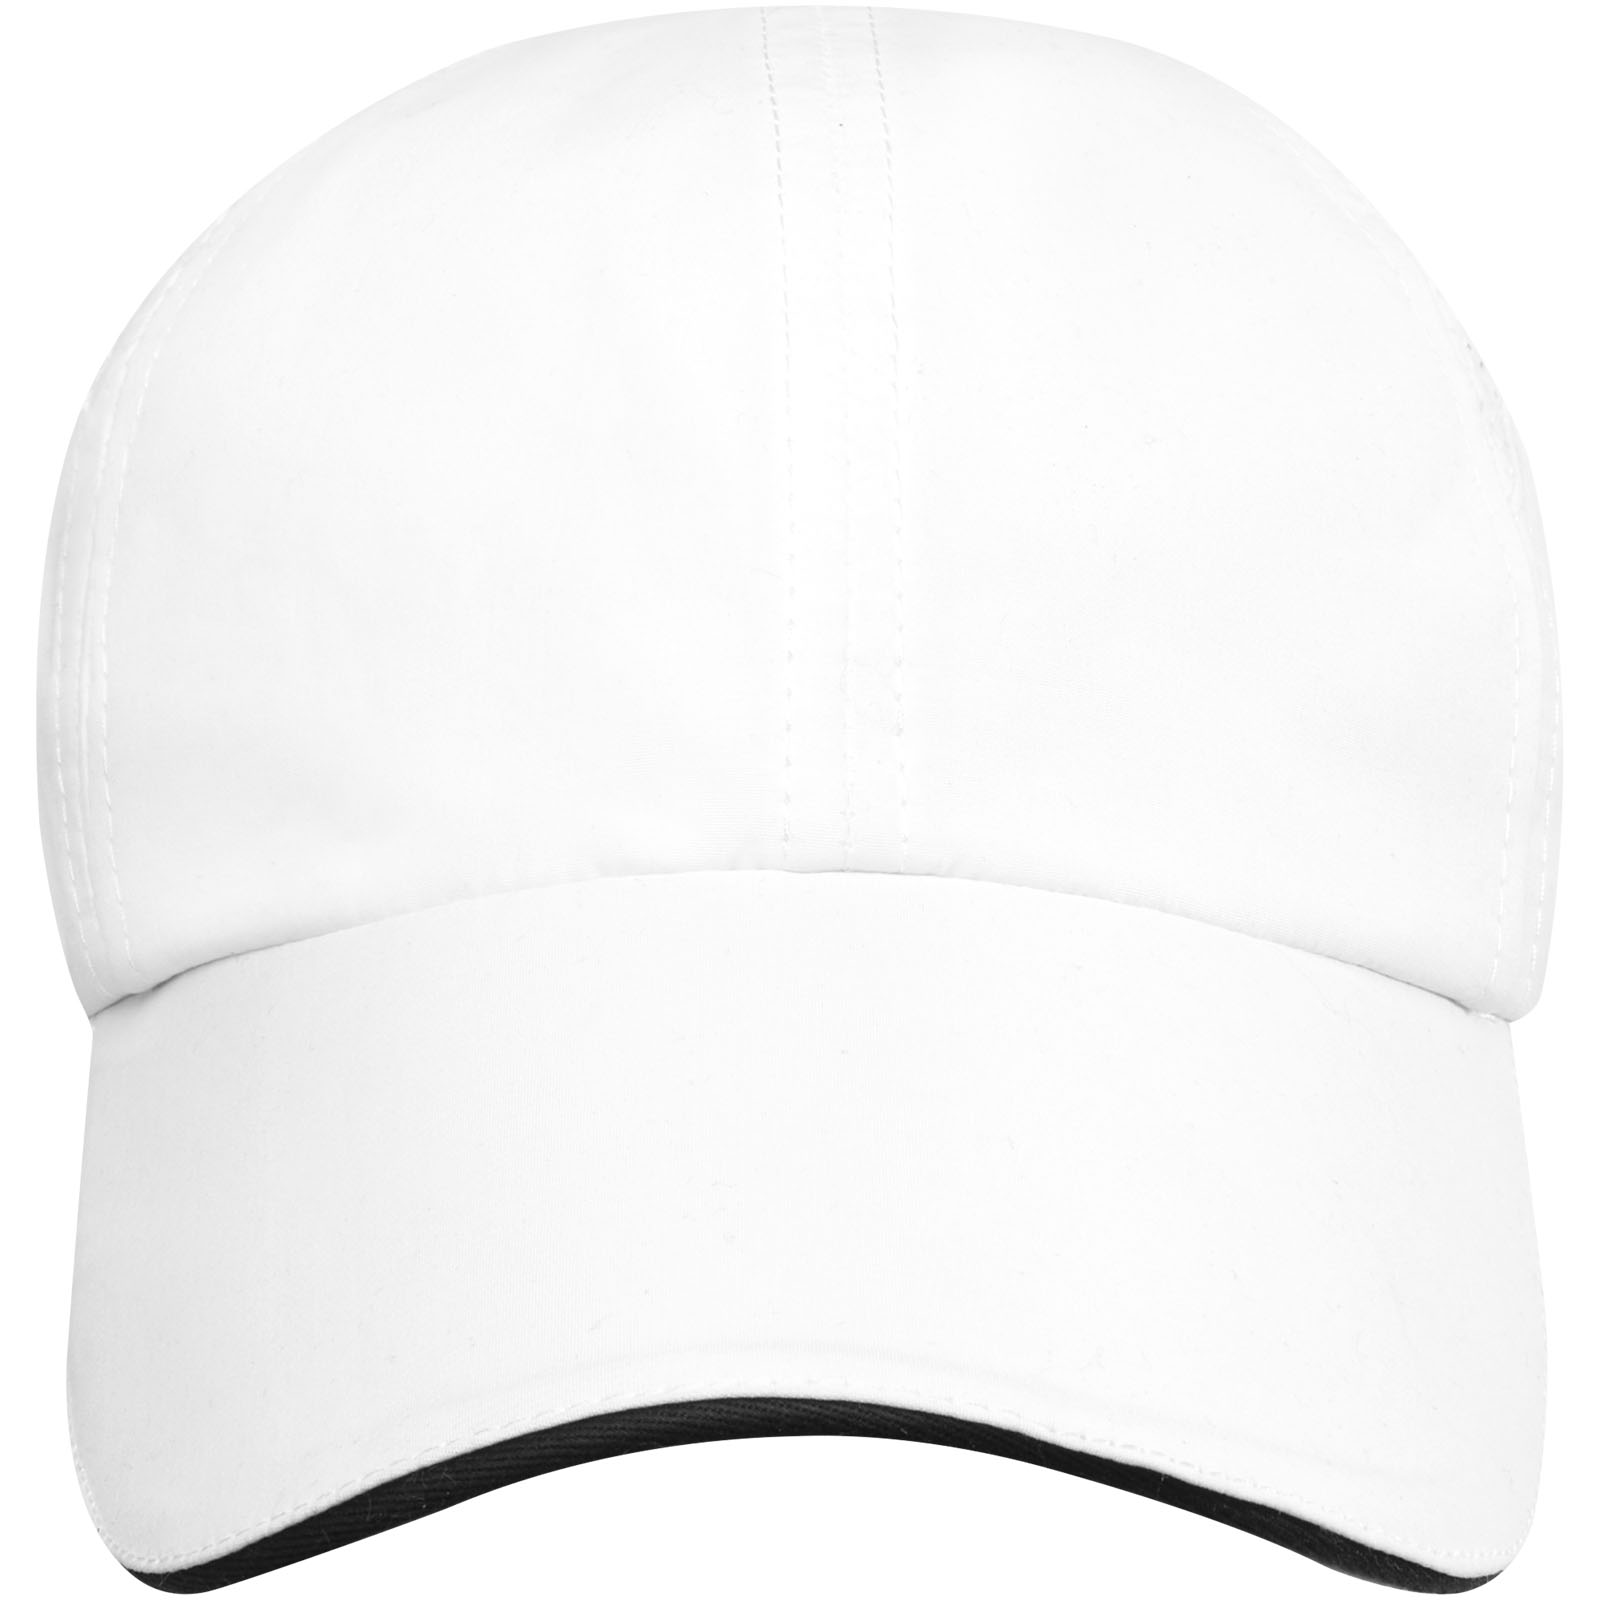 Advertising Caps & Hats - Morion 6 panel GRS recycled cool fit sandwich cap - 1